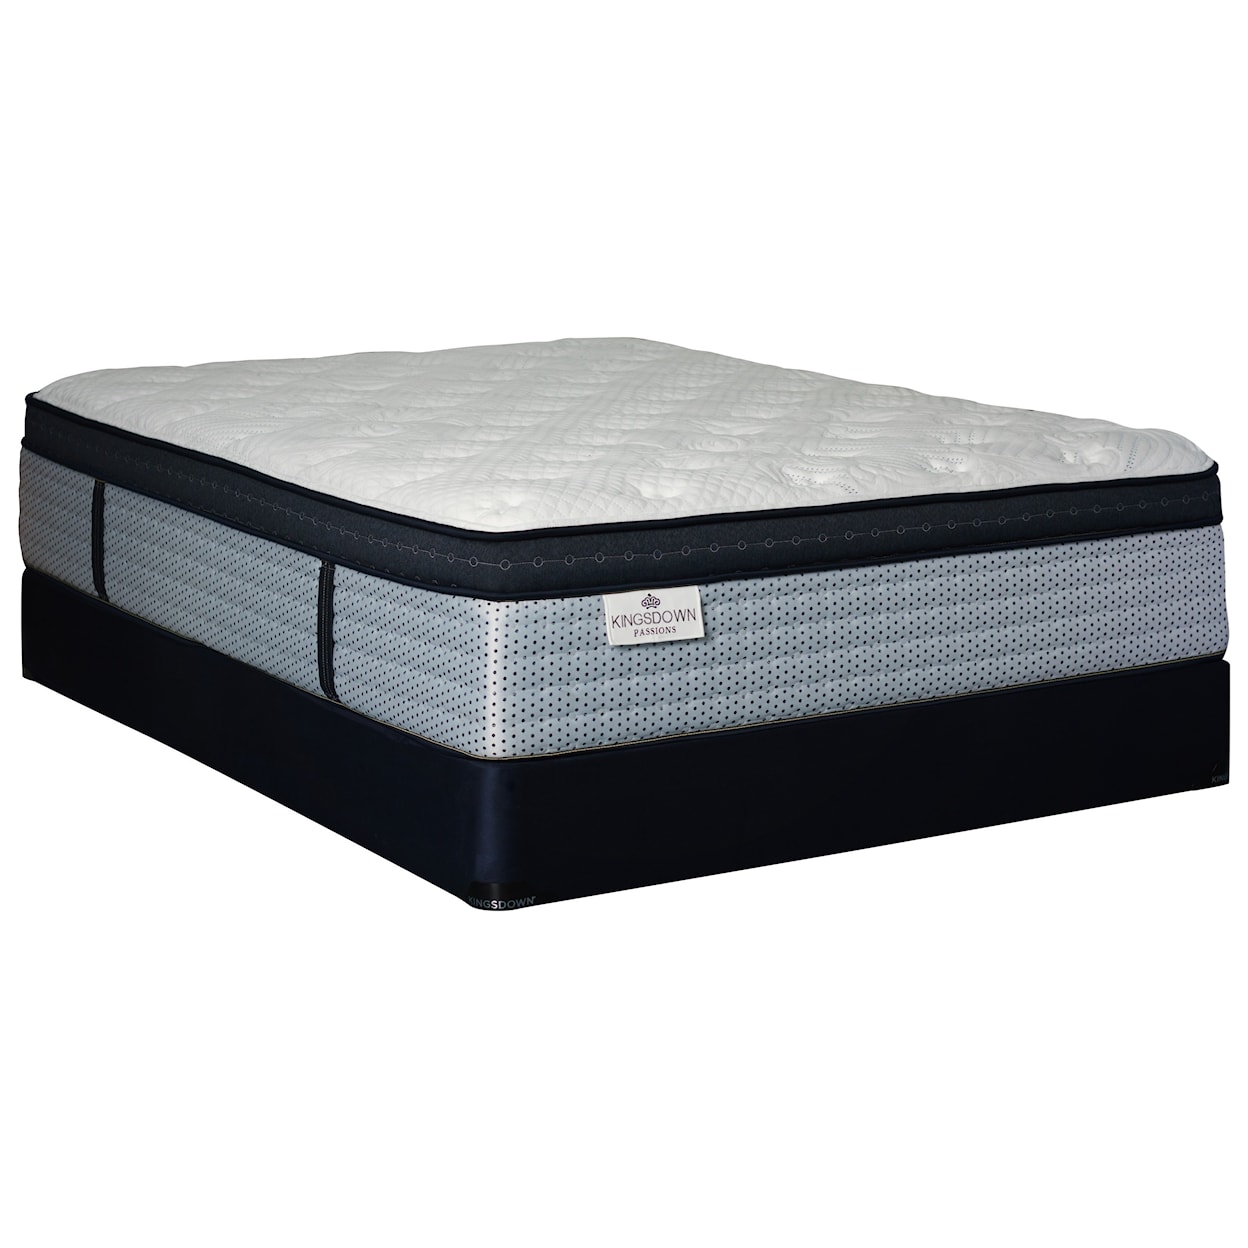 Kingsdown Brimsted ET Twin XL Pocketed Coil Mattress Set